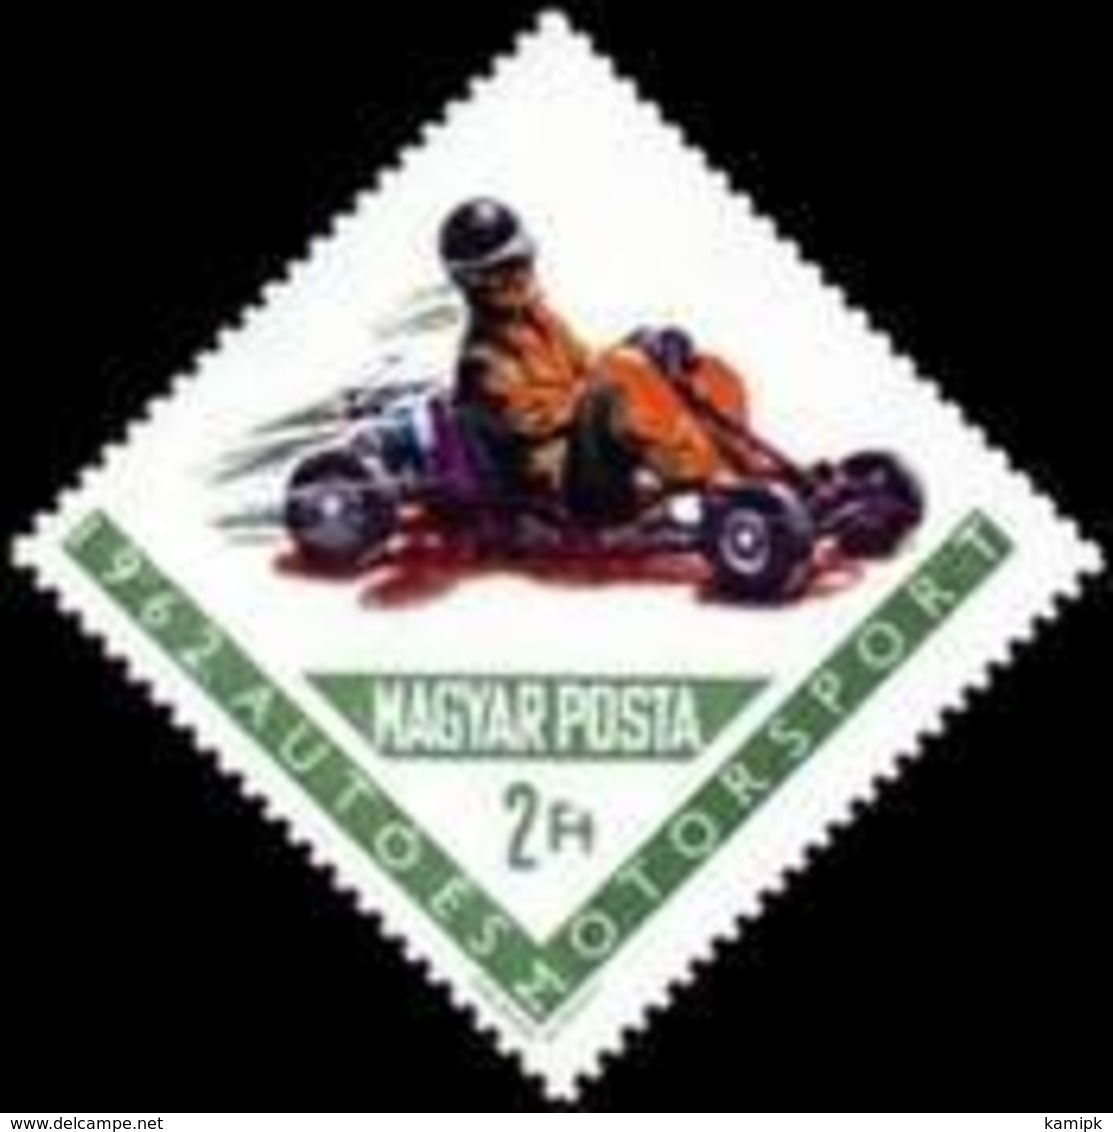 USED STAMPS Hungary - Motorcycling -1962